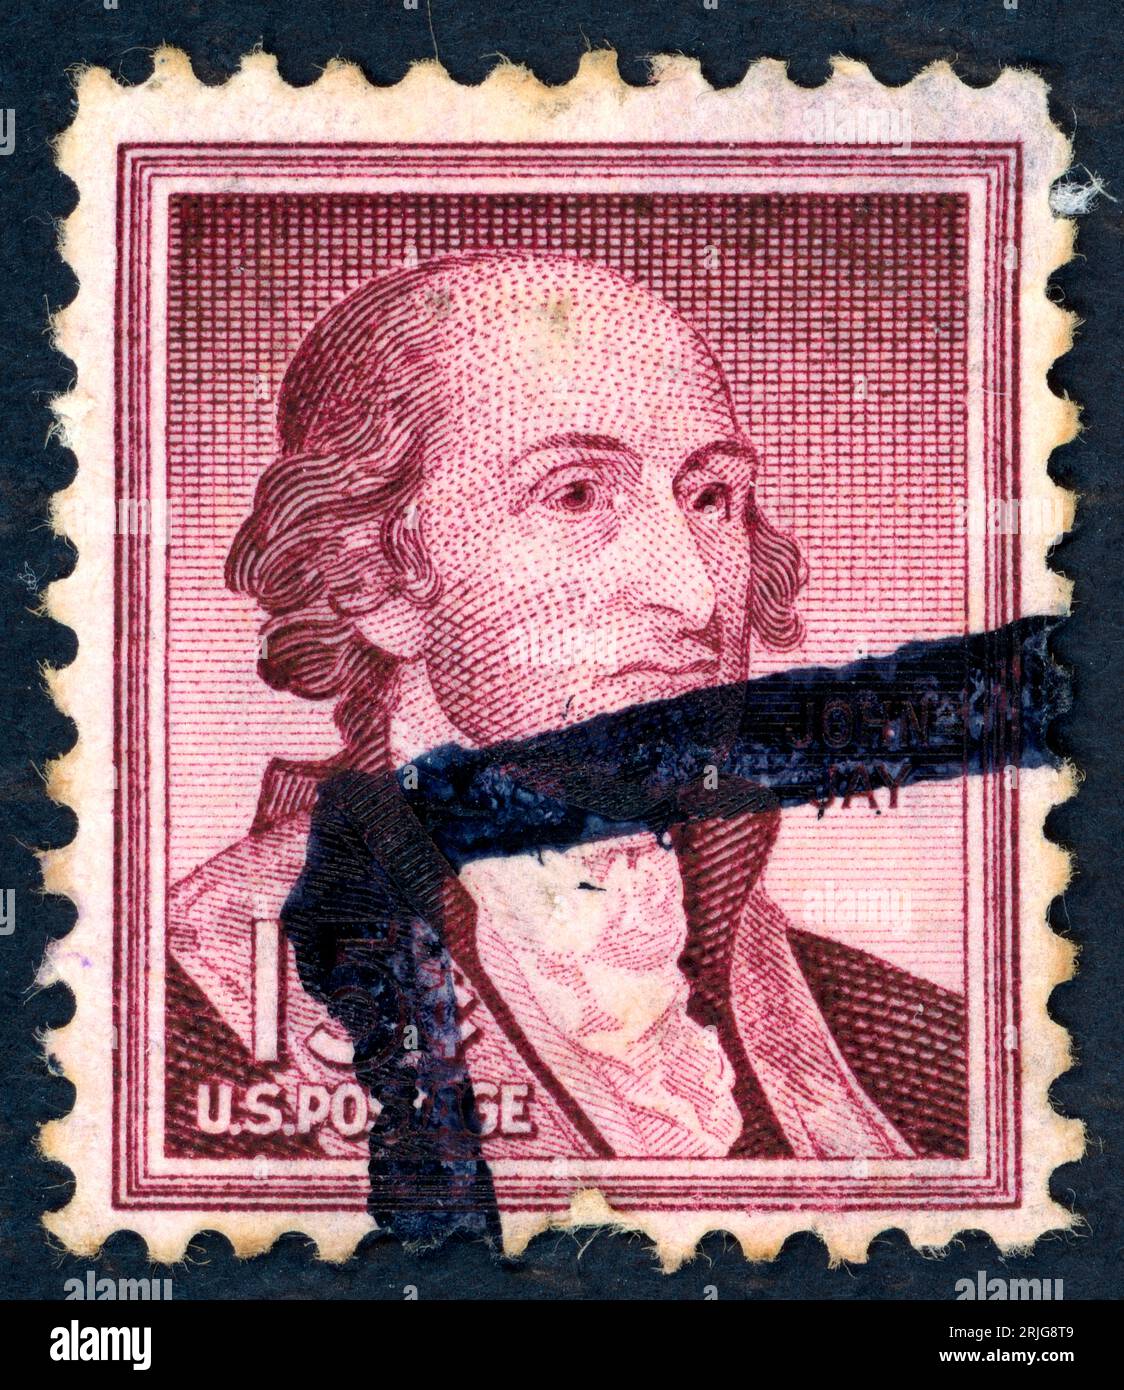 John Jay (1745 – 1829). Postage stamp issued in the US in 1958. John Jay a Founding Father of the United States who served the new nation in both law and diplomacy. He established important judicial precedents as the first chief justice of the United States (1789–95) and negotiated the Jay Treaty of 1794, which settled major grievances with Great Britain and promoted commercial prosperity. Stock Photo